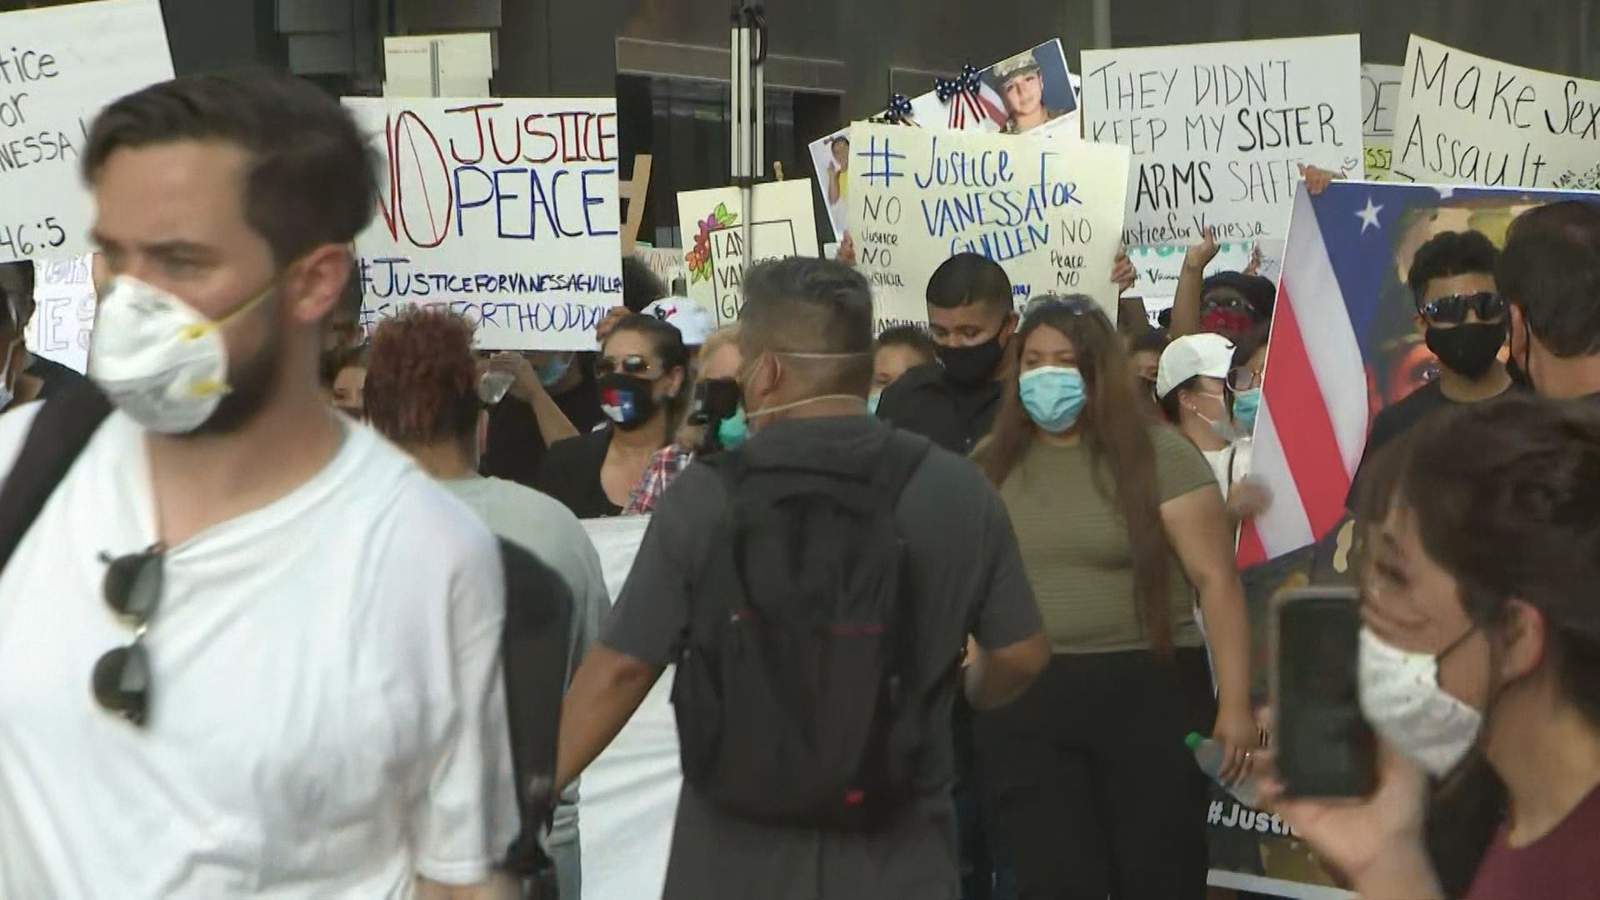 Hundreds march from Discovery Green to city hall to demand justice for Vanessa Guillen